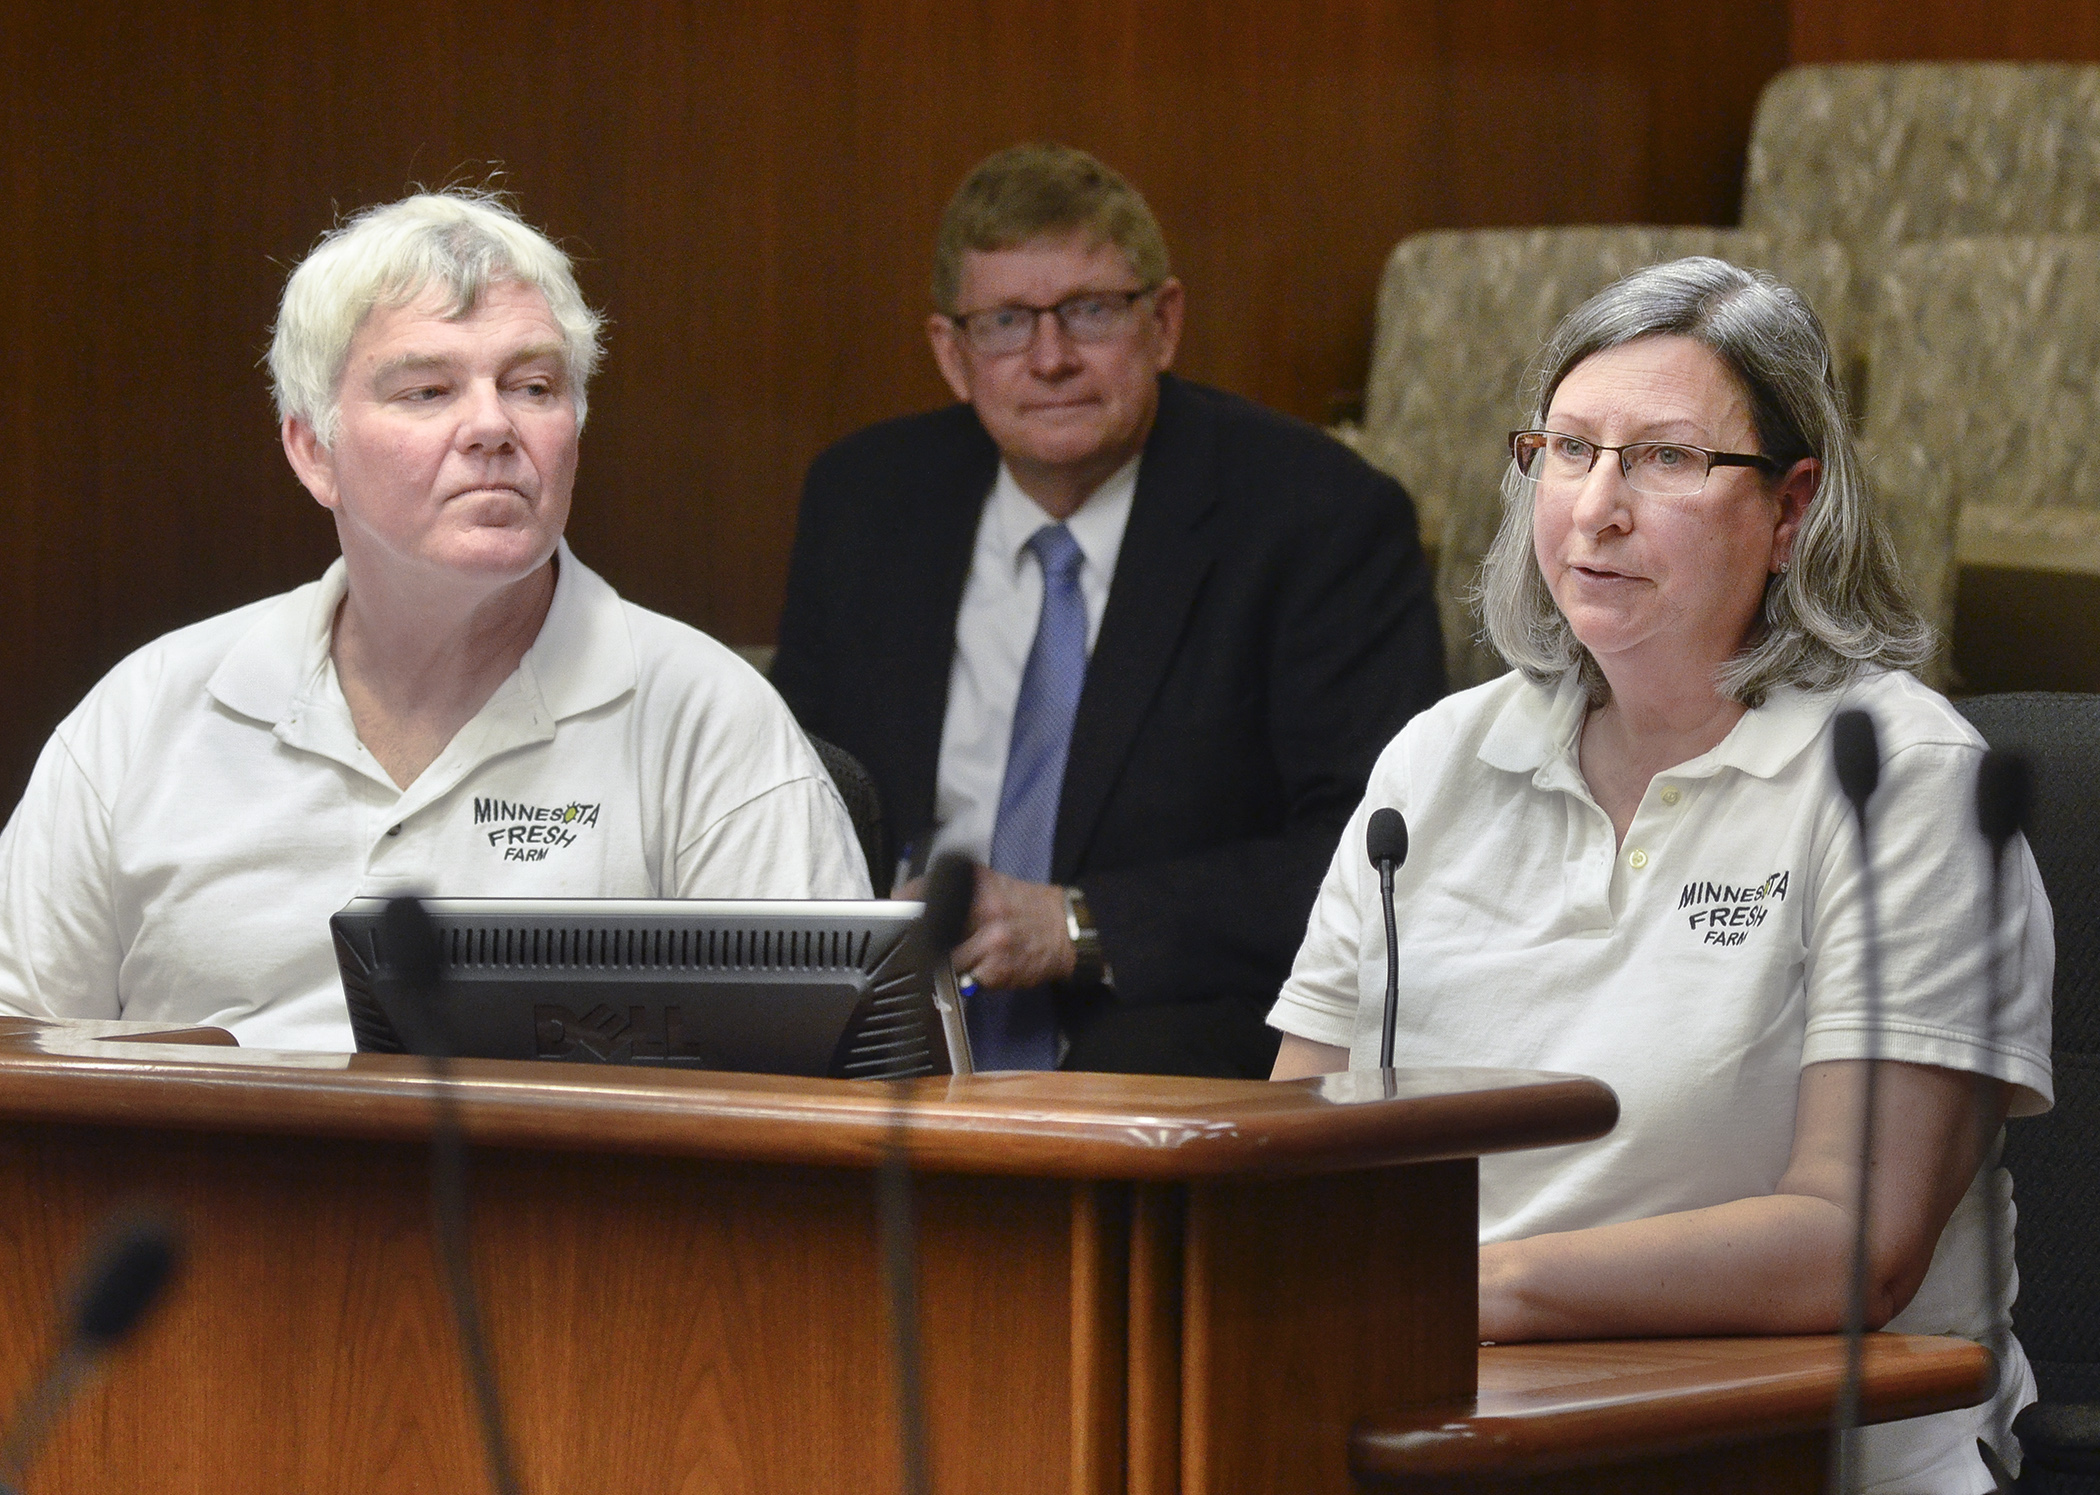 Bruce and Sharon Johnson, who run Minnesota Fresh Farm in East Bethel, testify in support of a bill that would provide agritourism activities liability immunity. Rep. Paul Anderson, center, sponsors the bill. Photo by Andrew VonBank.